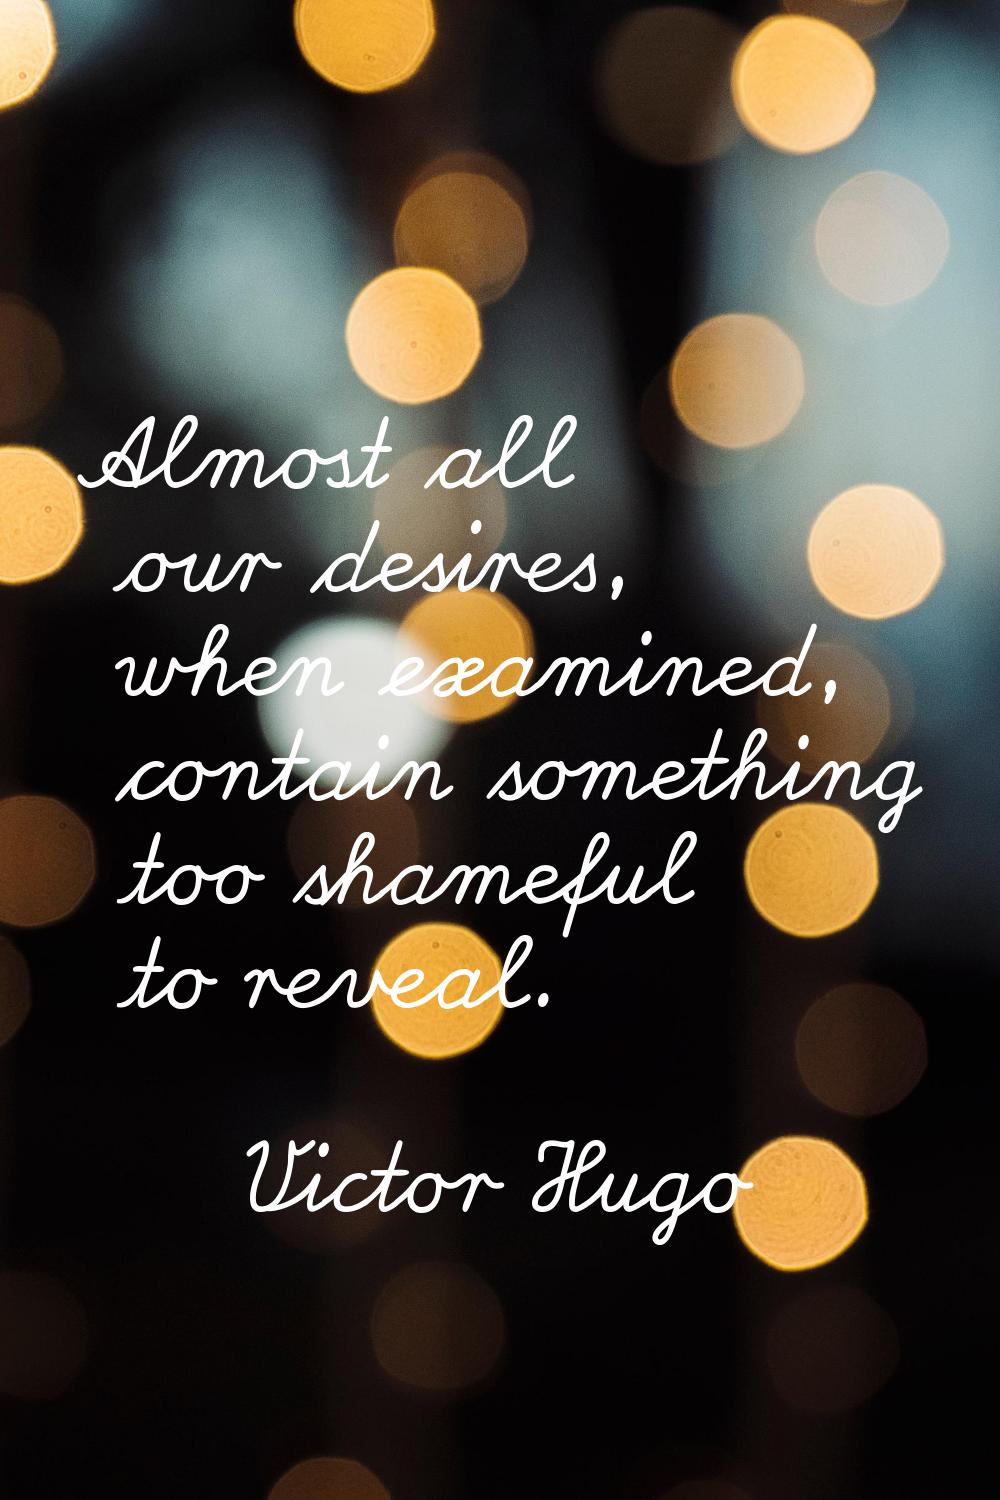 Almost all our desires, when examined, contain something too shameful to reveal.